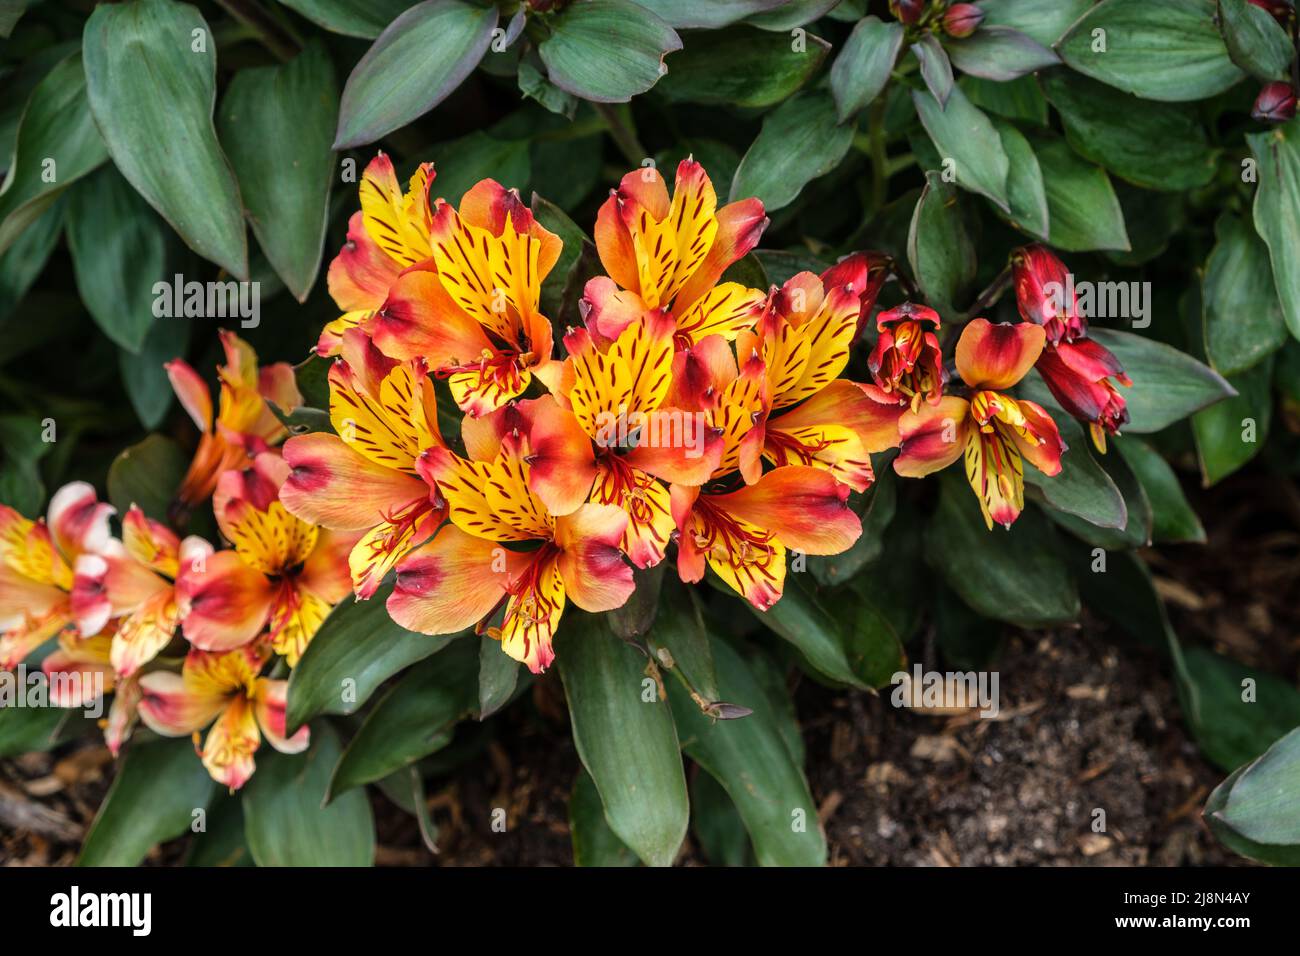 Peruvian lily (also known as Golden lily of the incas or Inca lily) flowers Stock Photo